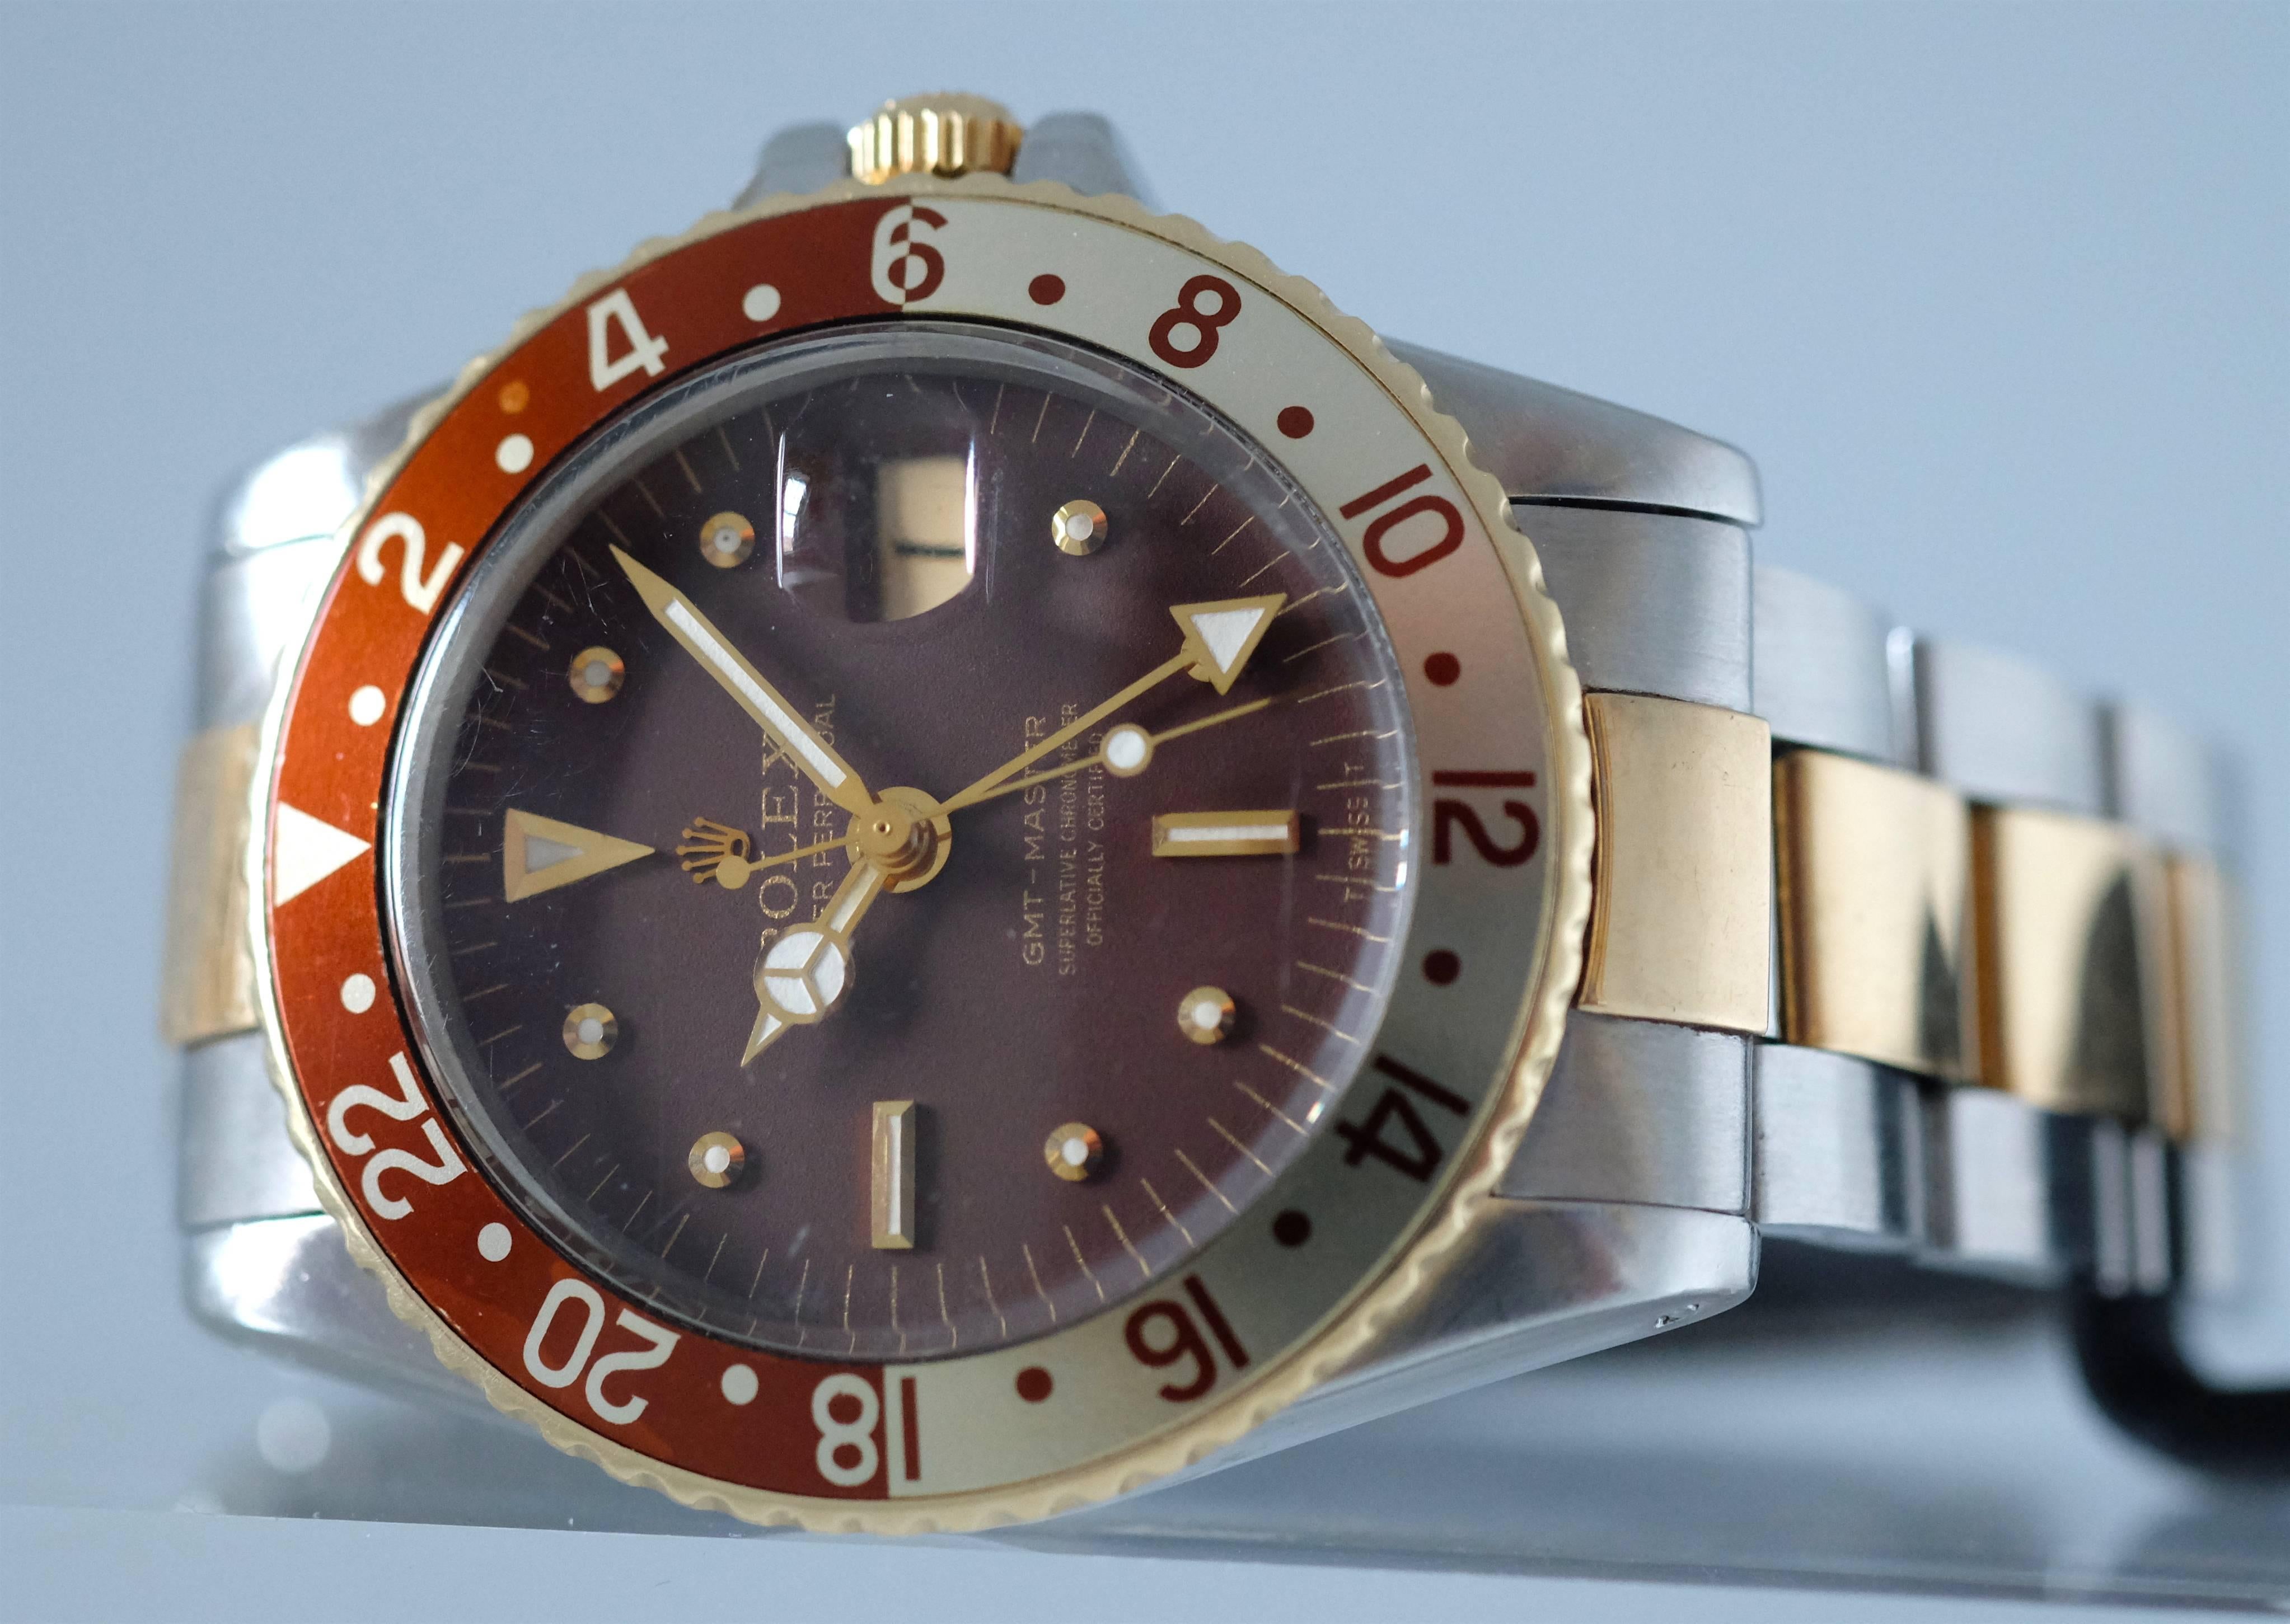 Rolex Ref. 1675 GMT-Master brown dial steel & gold,  Oyster Perpetual with 24-hour bezel and hand and a stainless steel  & Gold Rolex Oyster Fliplock bracelet with deployant clasp. 

Case: Three-body, polished and brushed, screw-down case back and